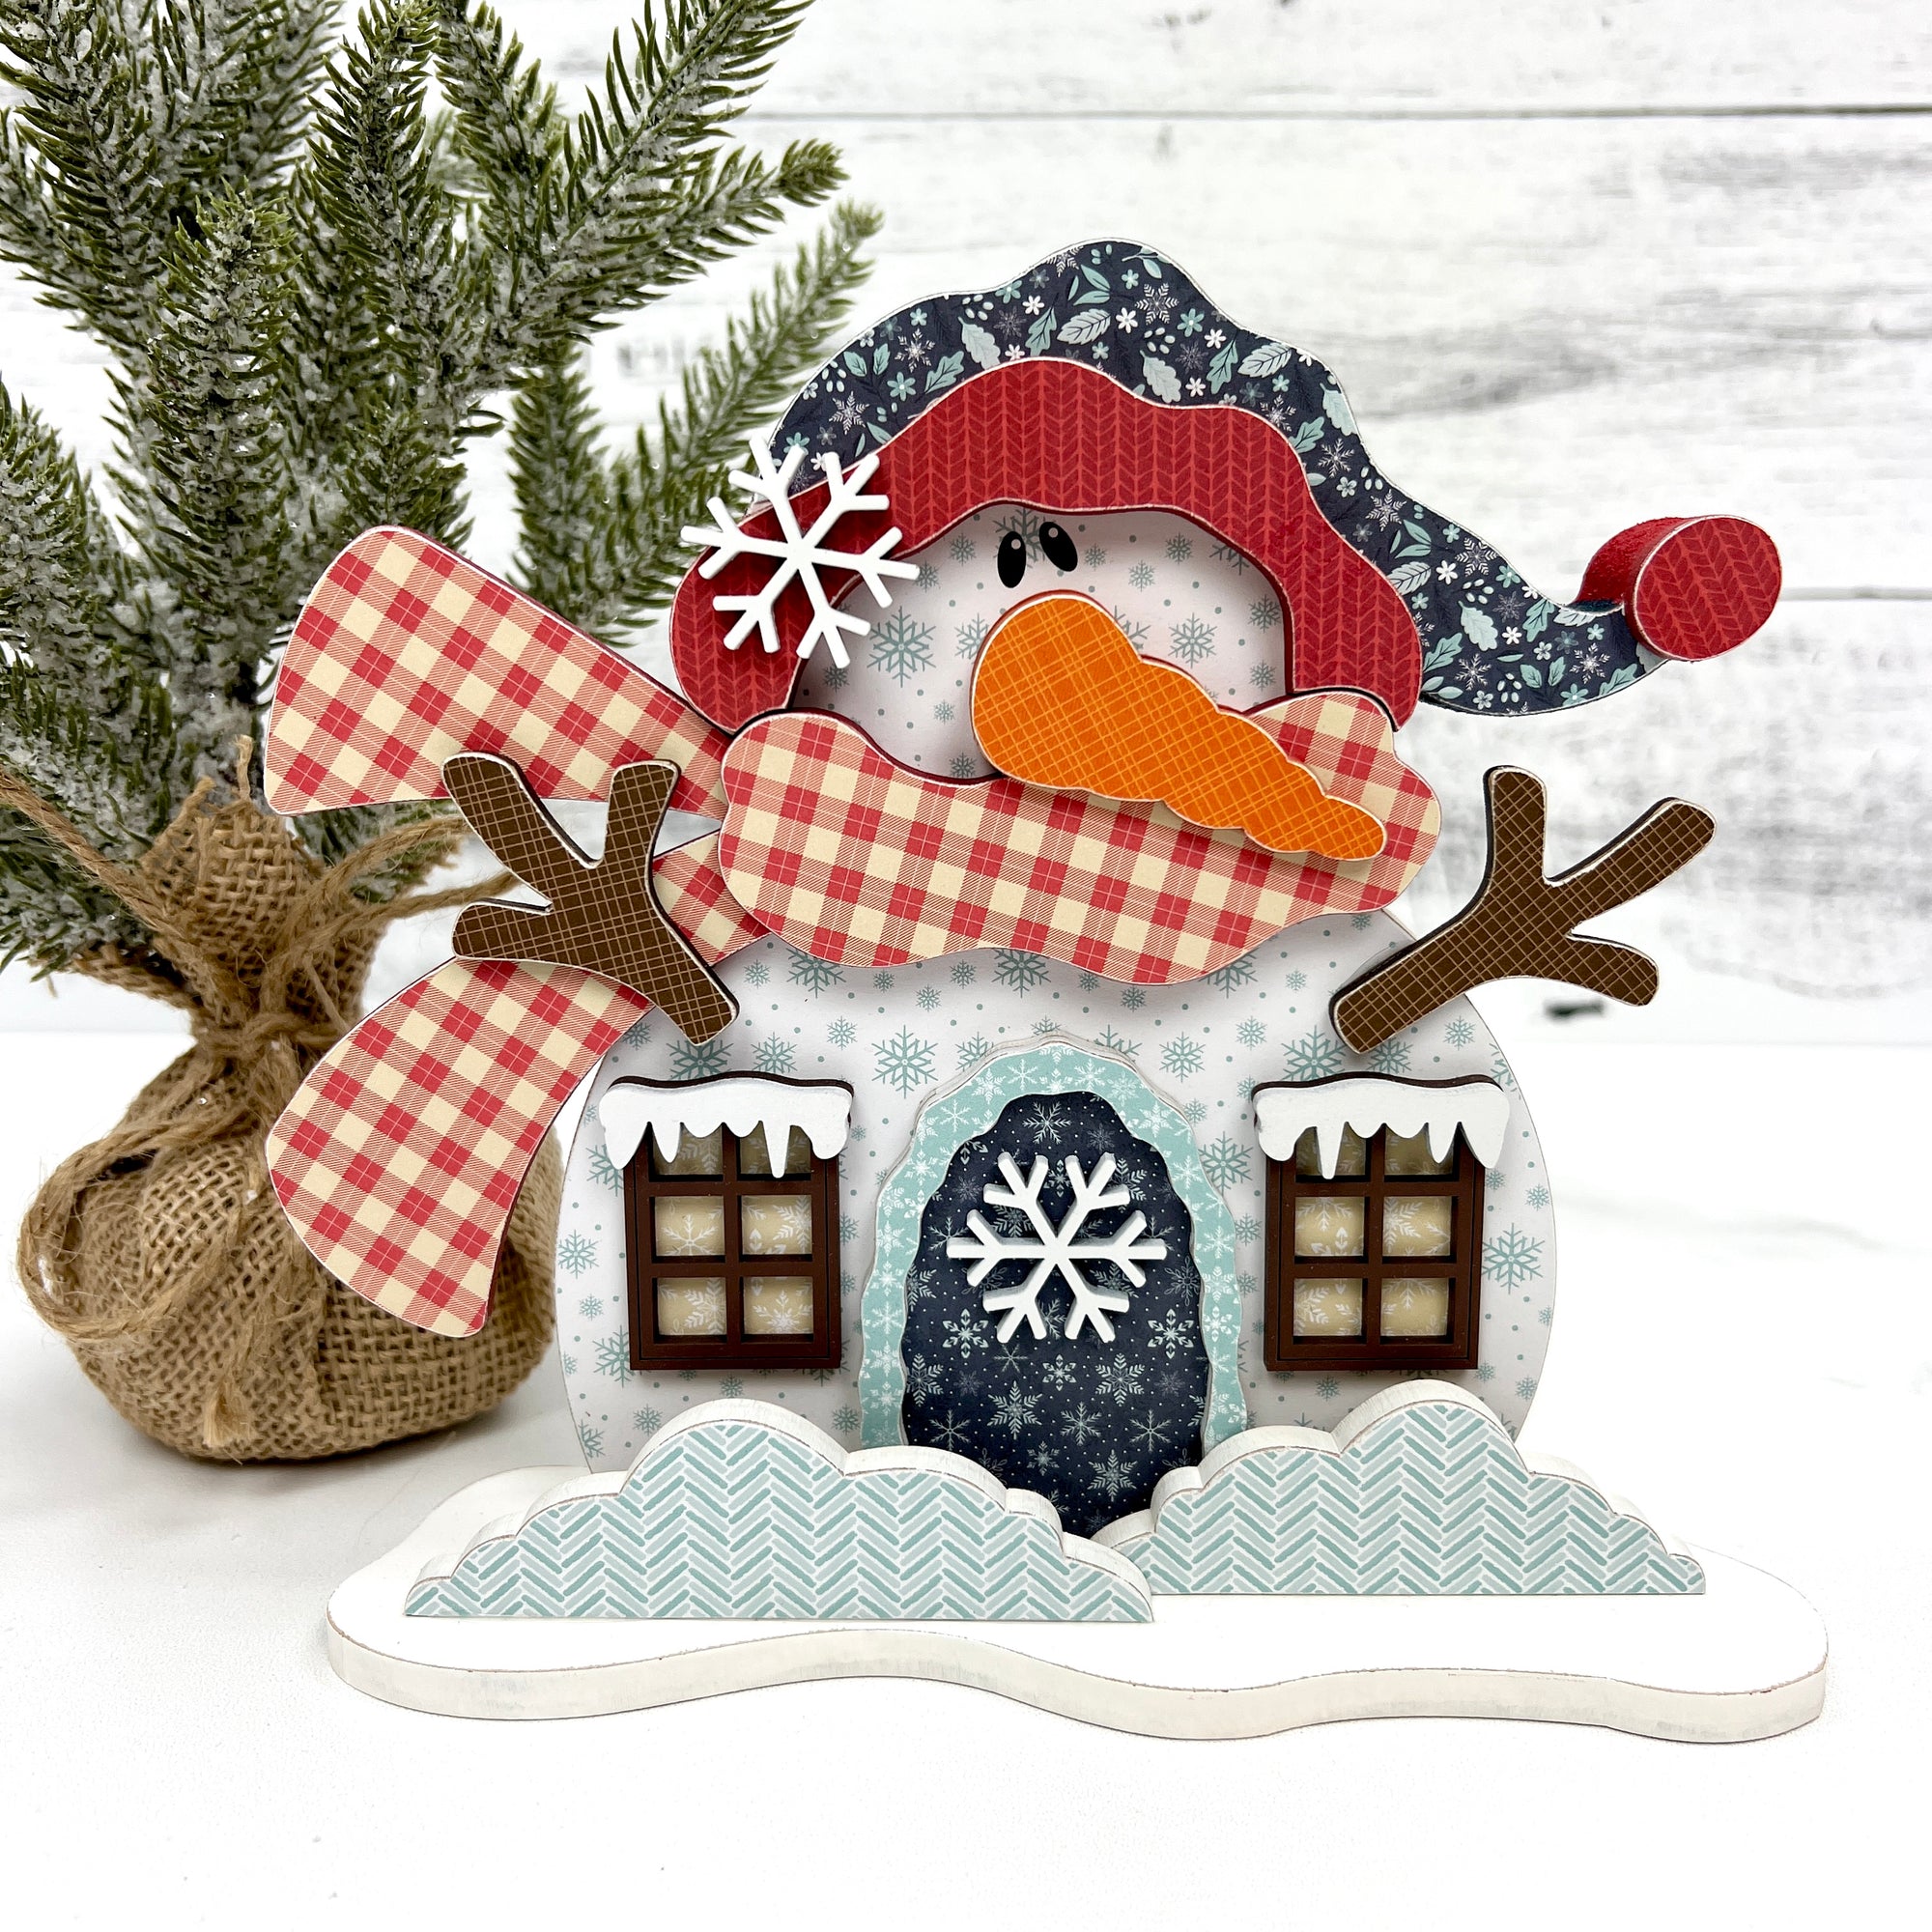 Snowman house wood decoration with red scarf and carrot nose.